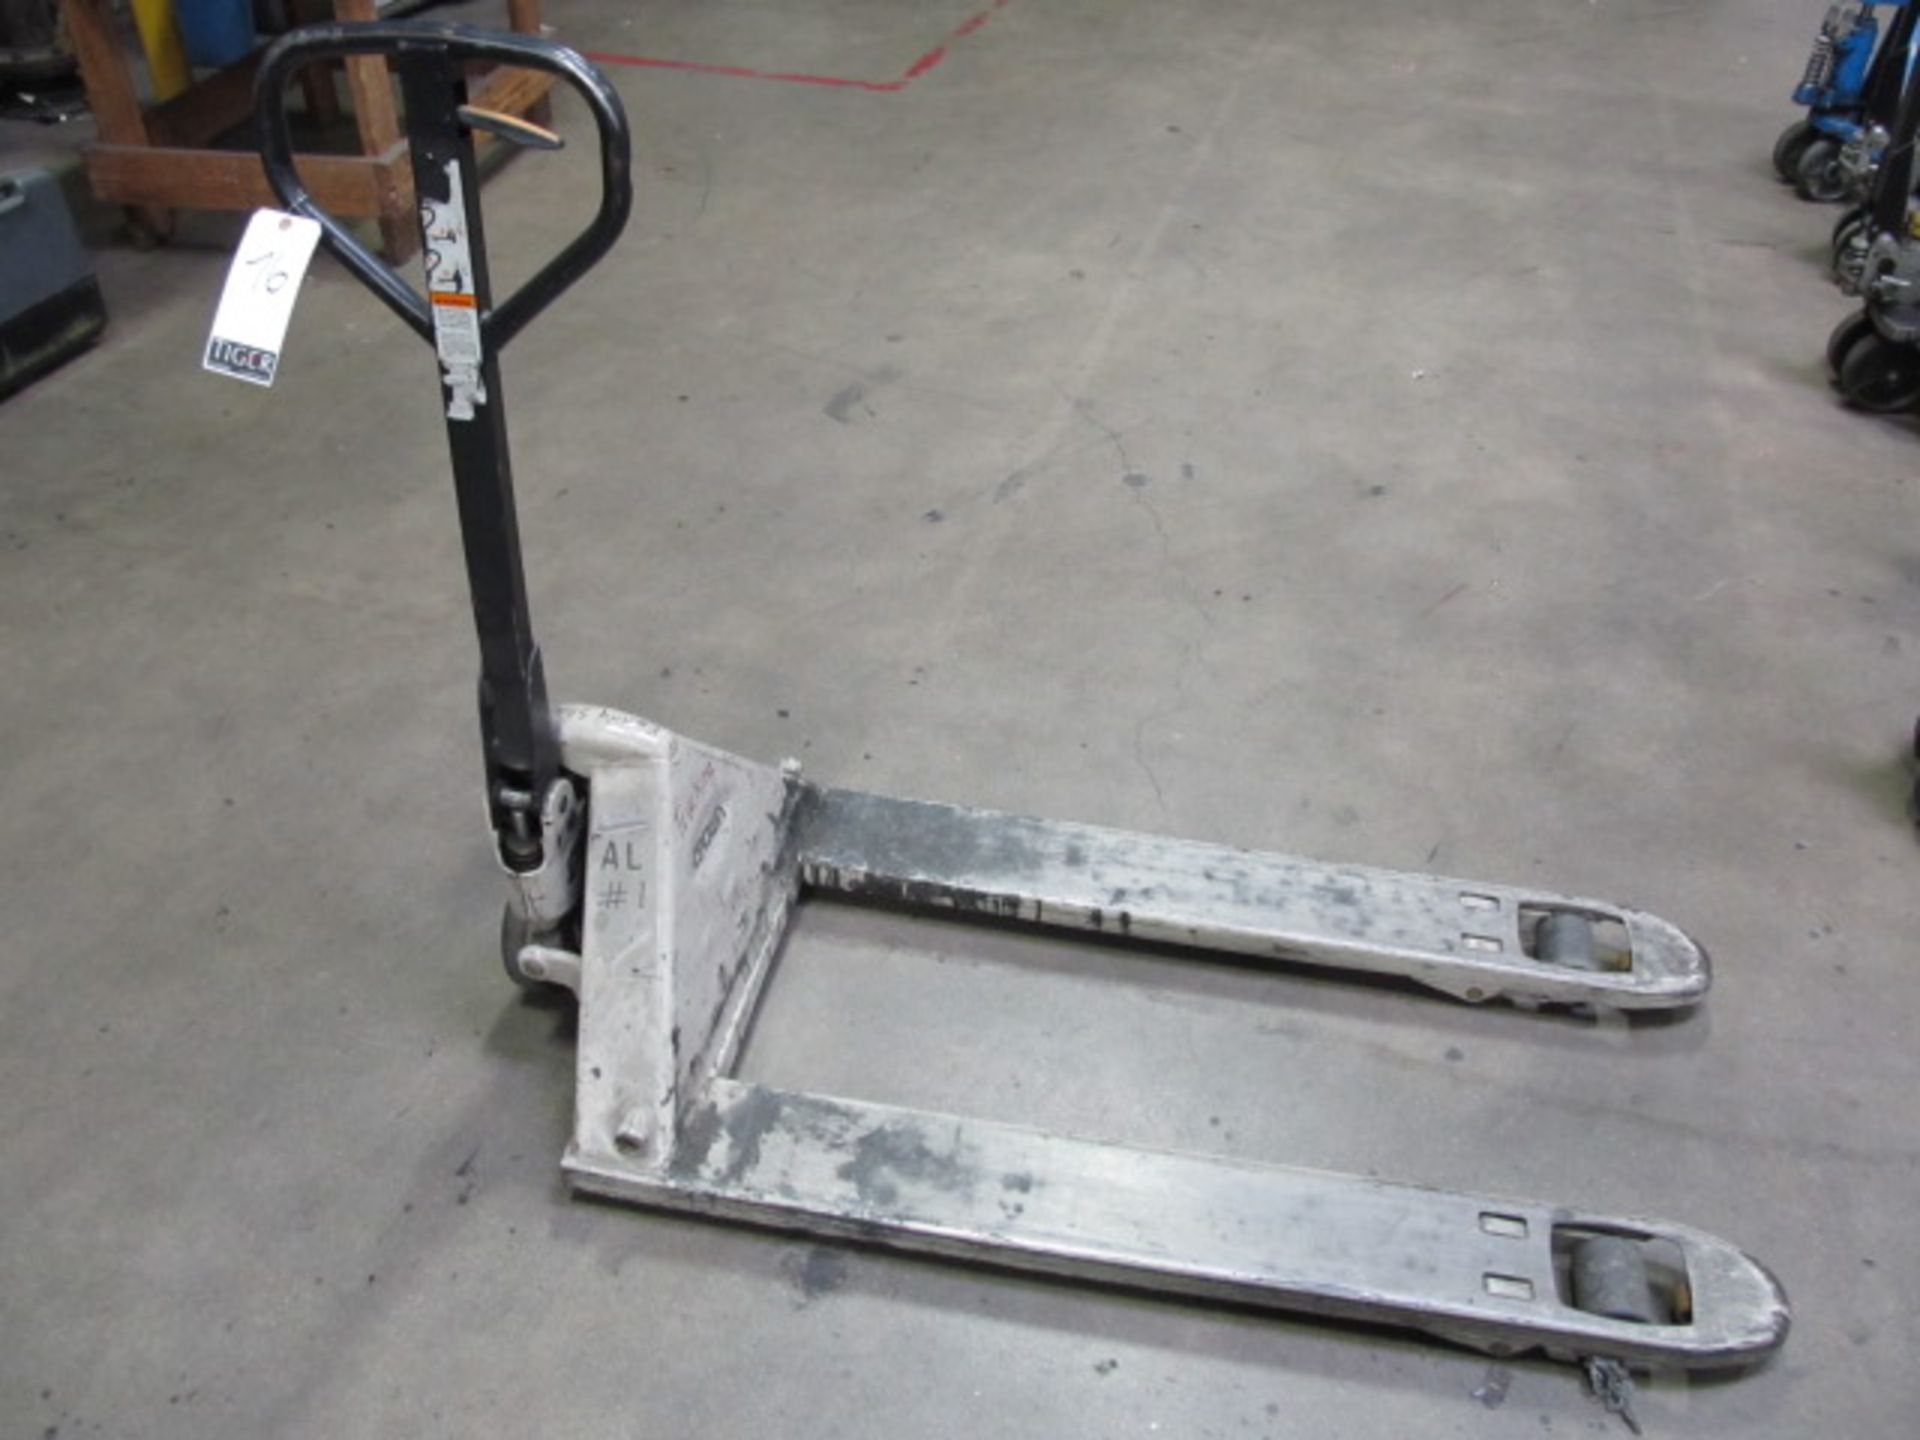 Crown 5000lb Capacity Pallet Jack. Asset Location: West Warehouse, Site Location: Mira Loma, CA